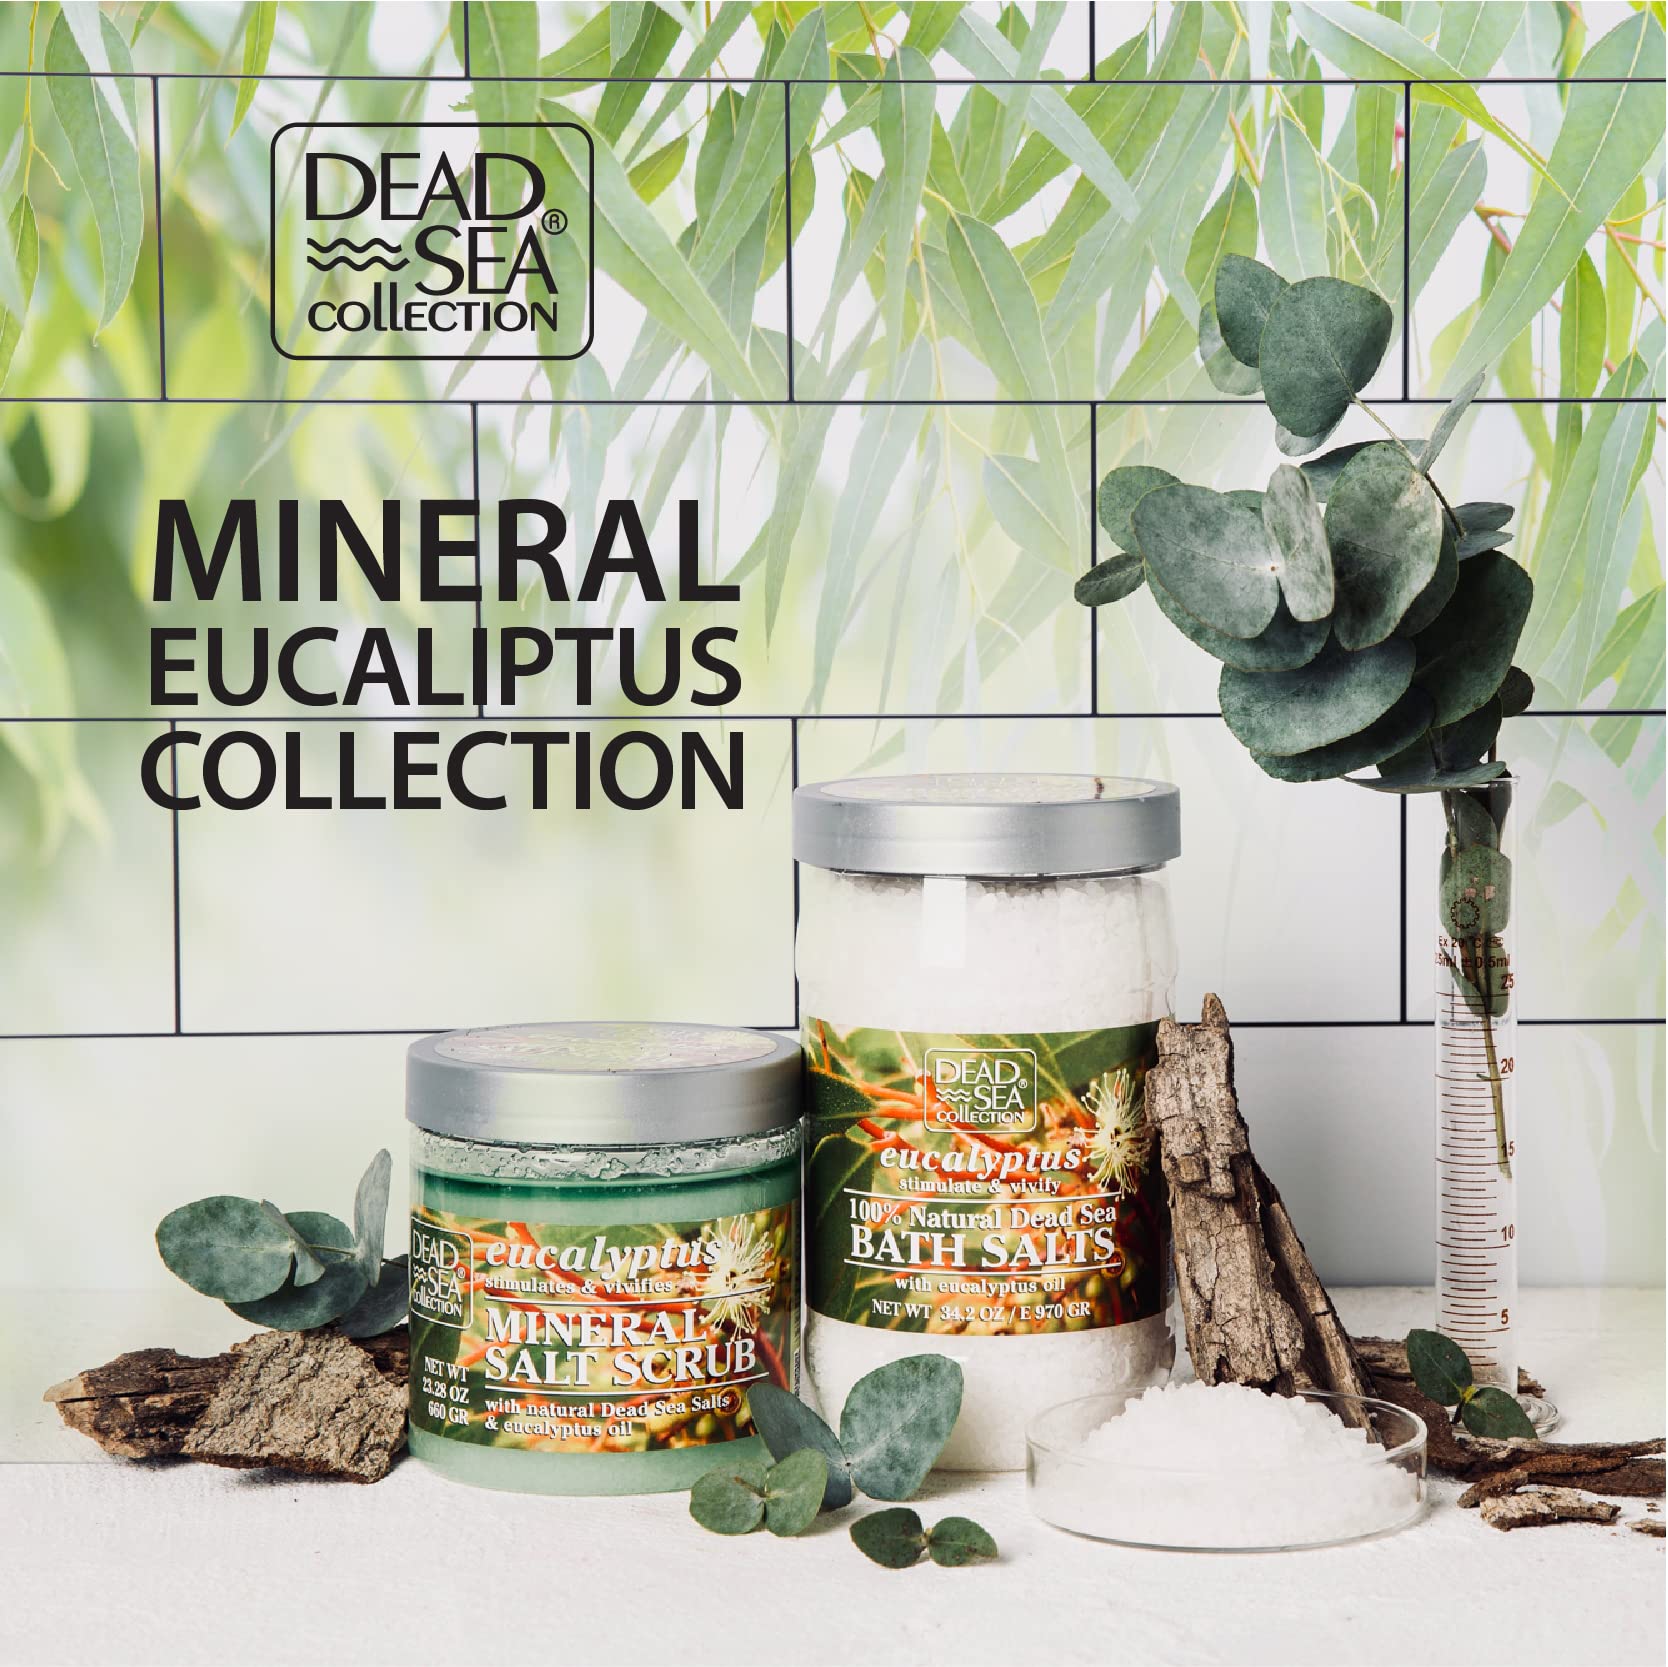 Dead Sea Collection Bath Salts Enriched 4PC -Eucalyptus -Coconut - Himalayan -Cherry Blossom- Natural Salt for Bath - Large 34.2 OZ. - Nourishing Essential Body Care for Soothing and Relaxing